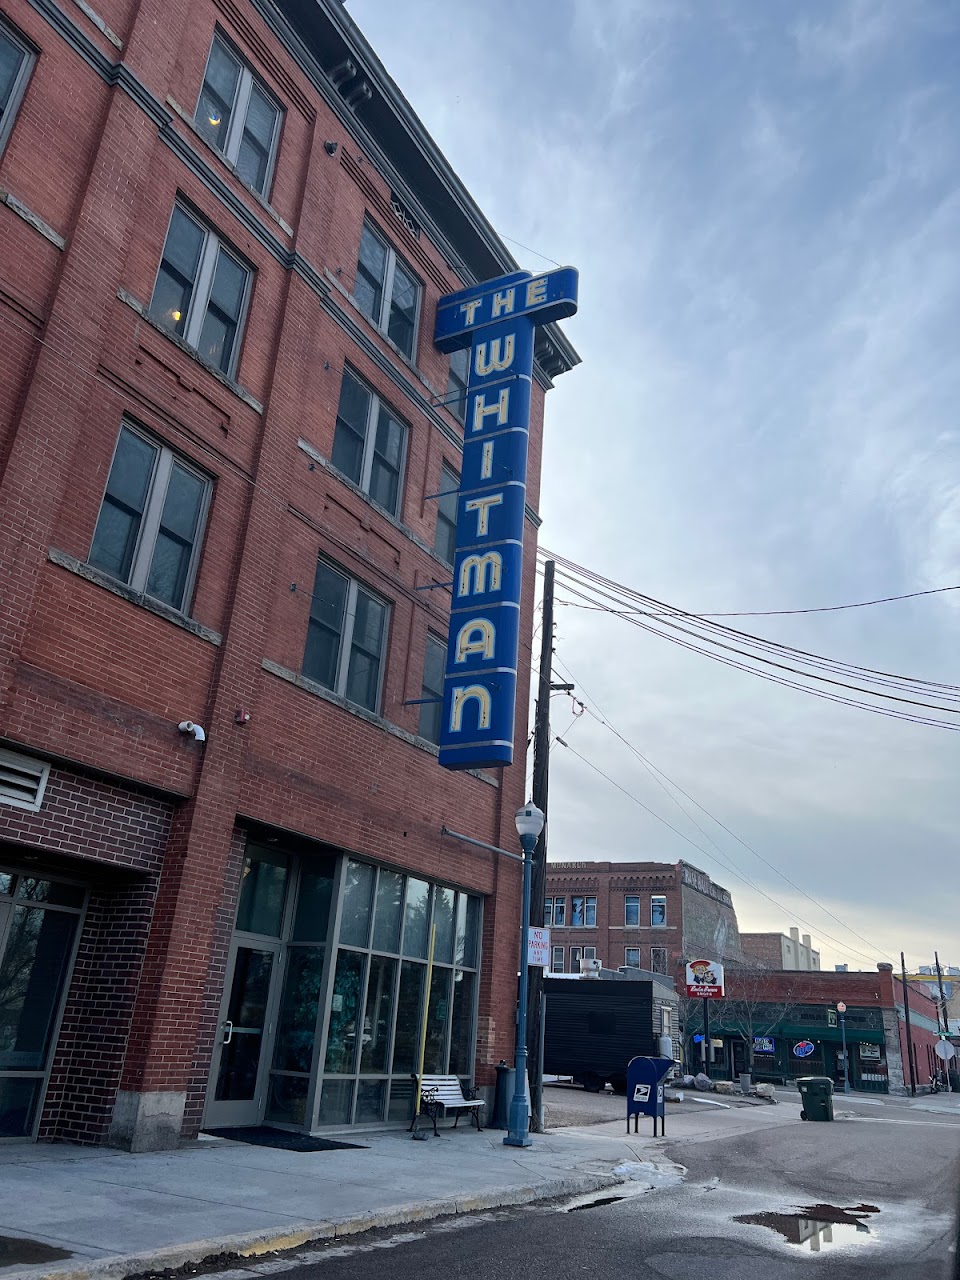 Photo of WHITMAN HOTEL. Affordable housing located at 122 SOUTH MAIN STREET POCATELLO, ID 83204